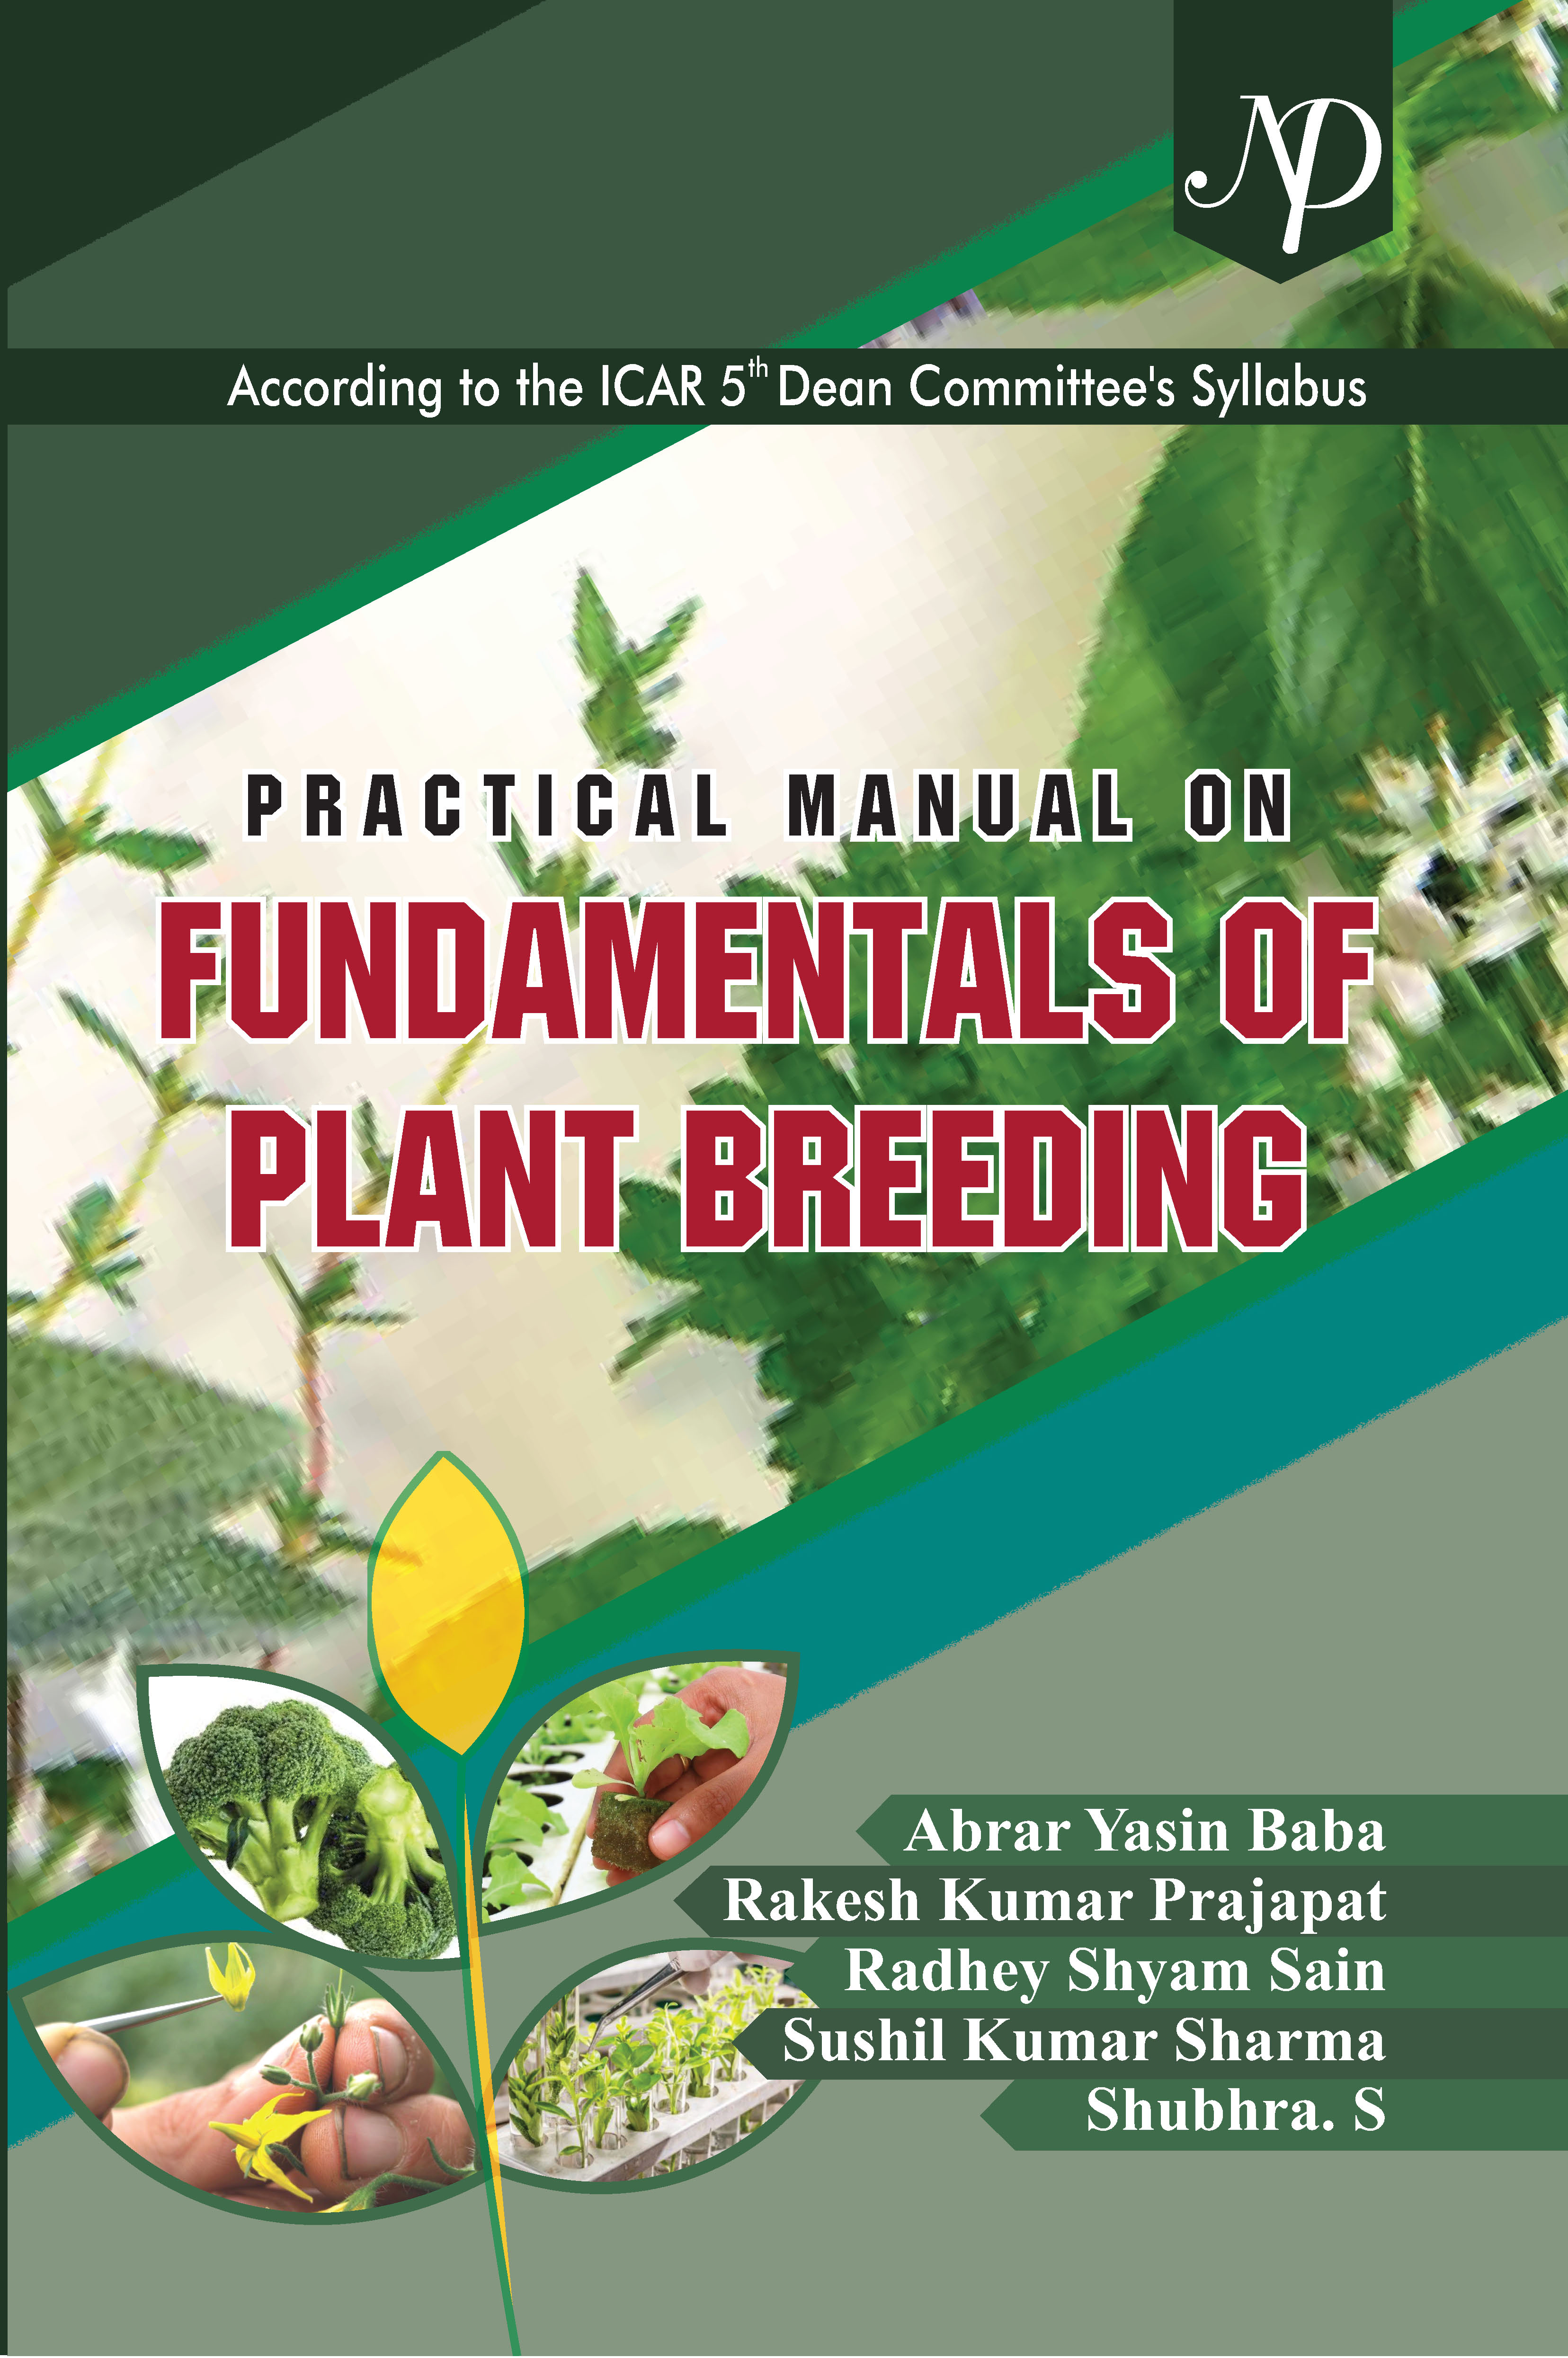 Practical Manual on Fundamentals of Plant Breeding Cover.jpg